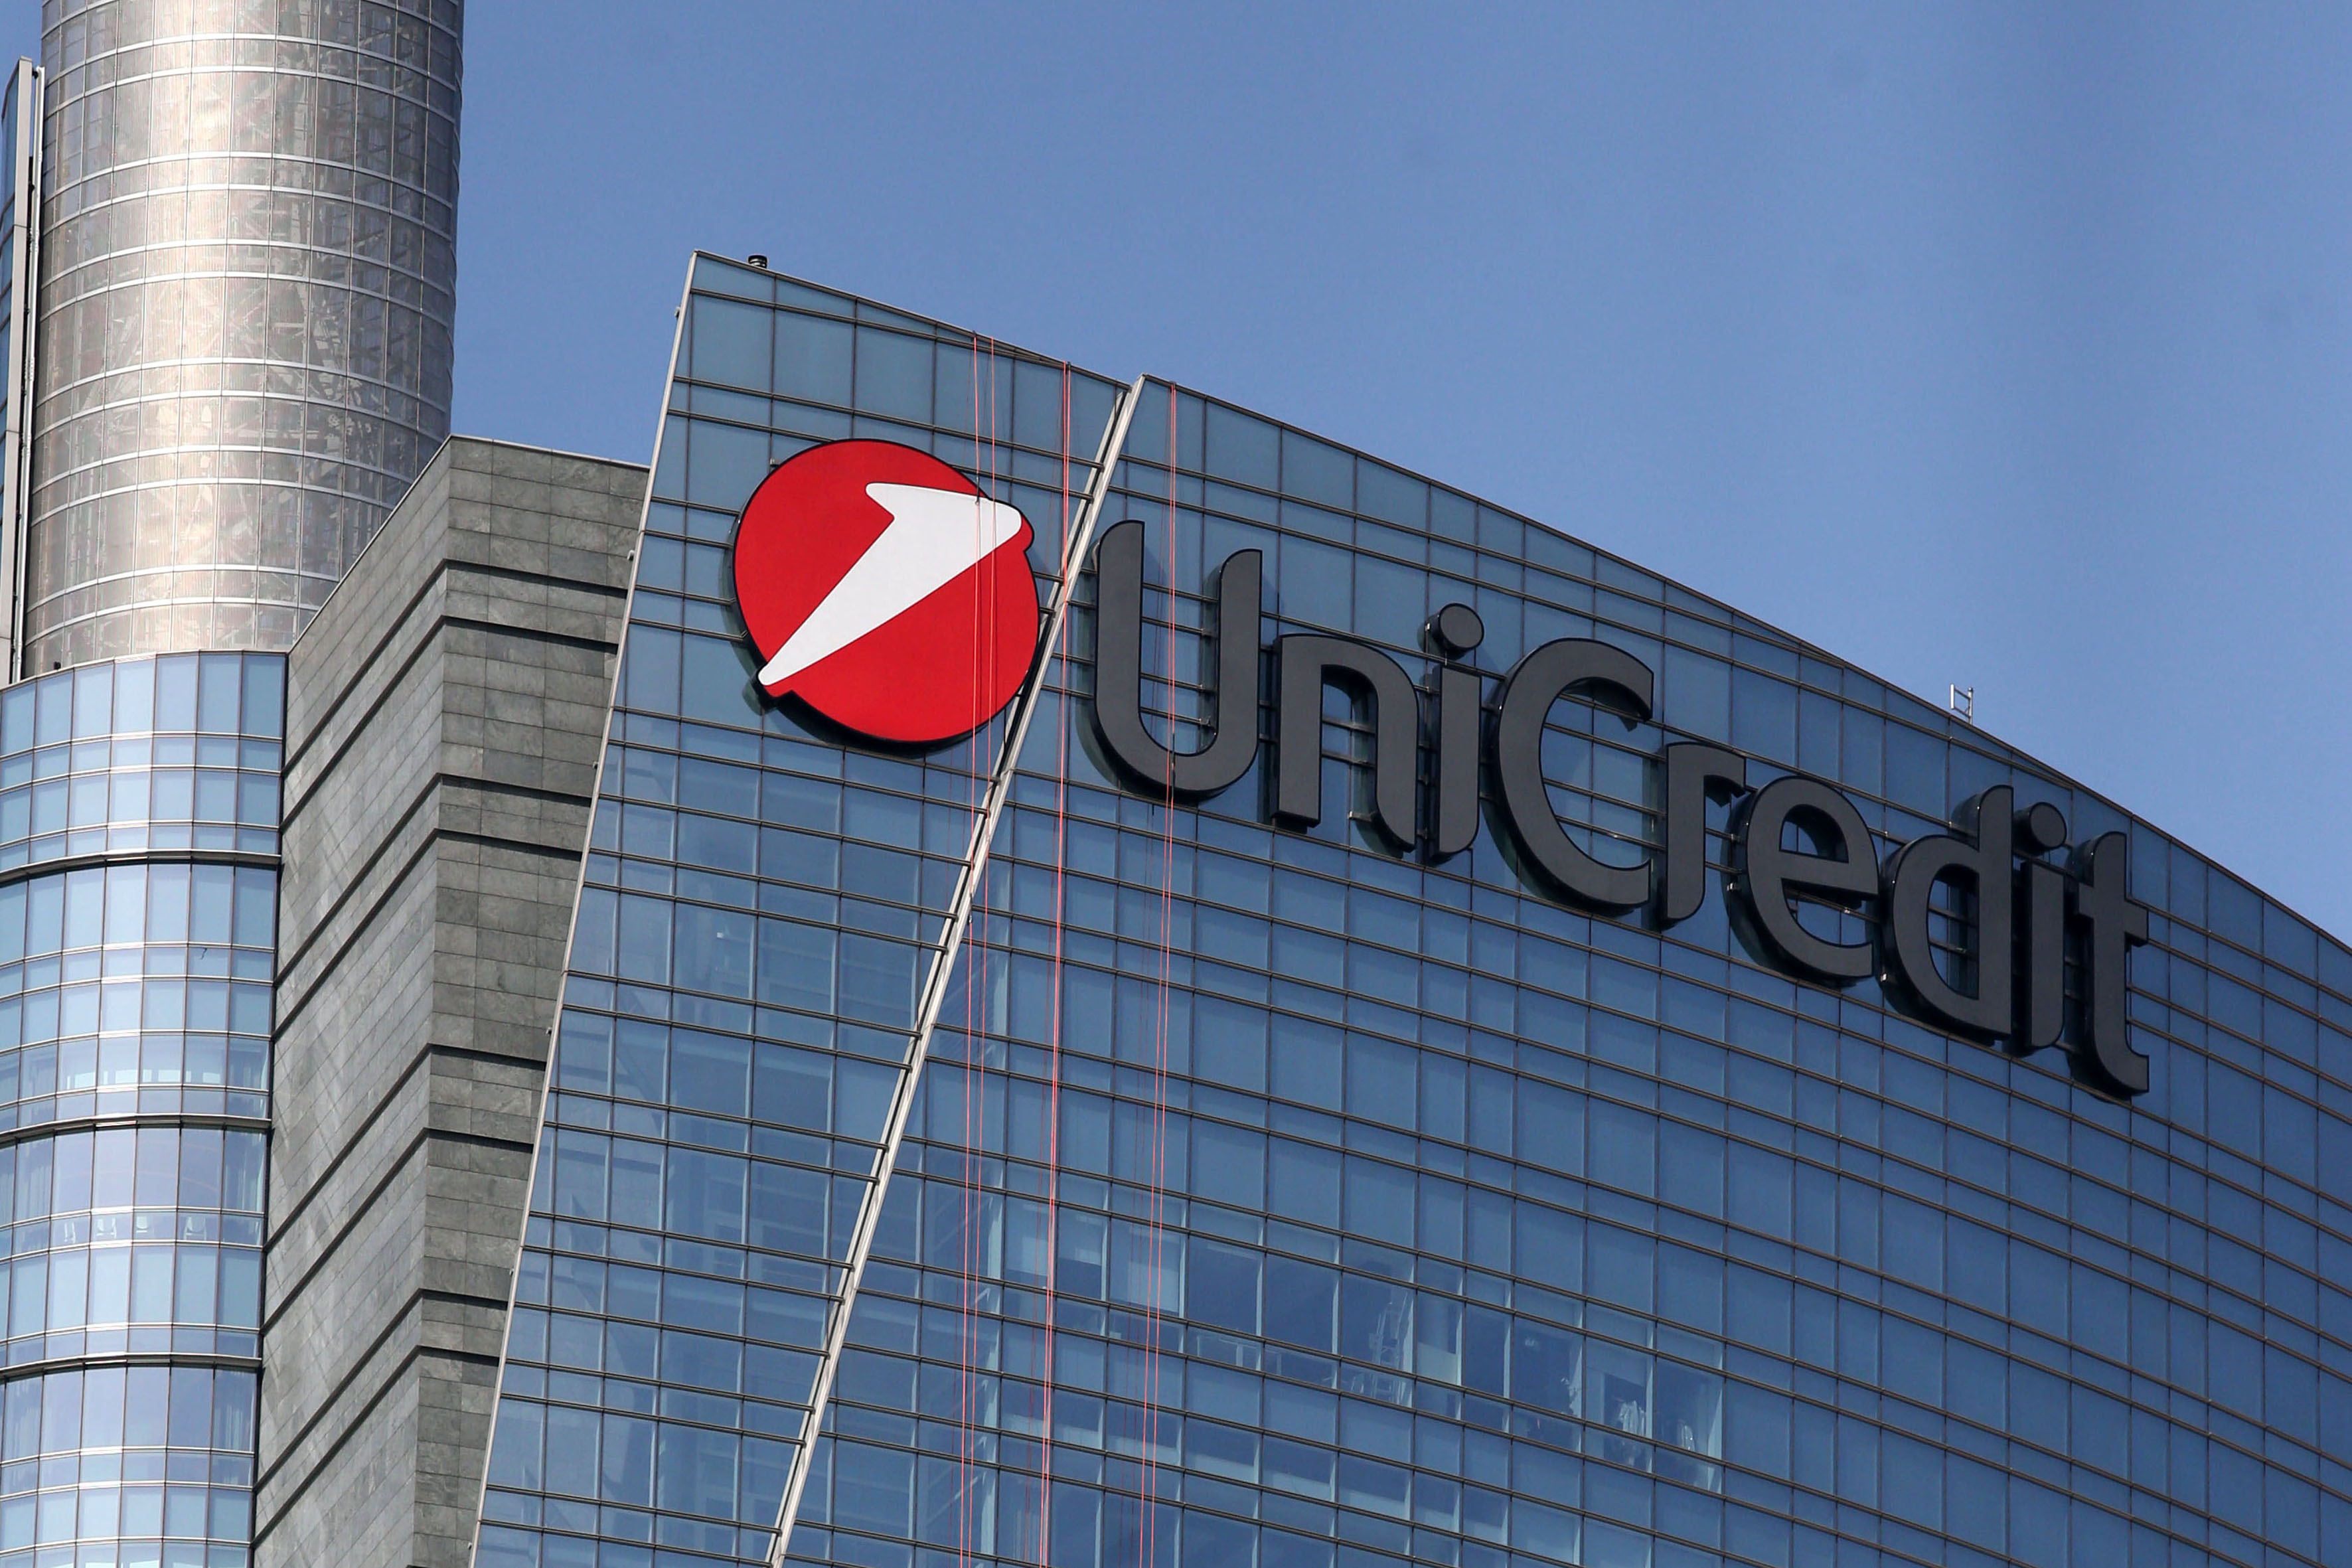 Unicredit: Ft, resigns head of remuneration committee, move precedes decision on Orcel thumbnail